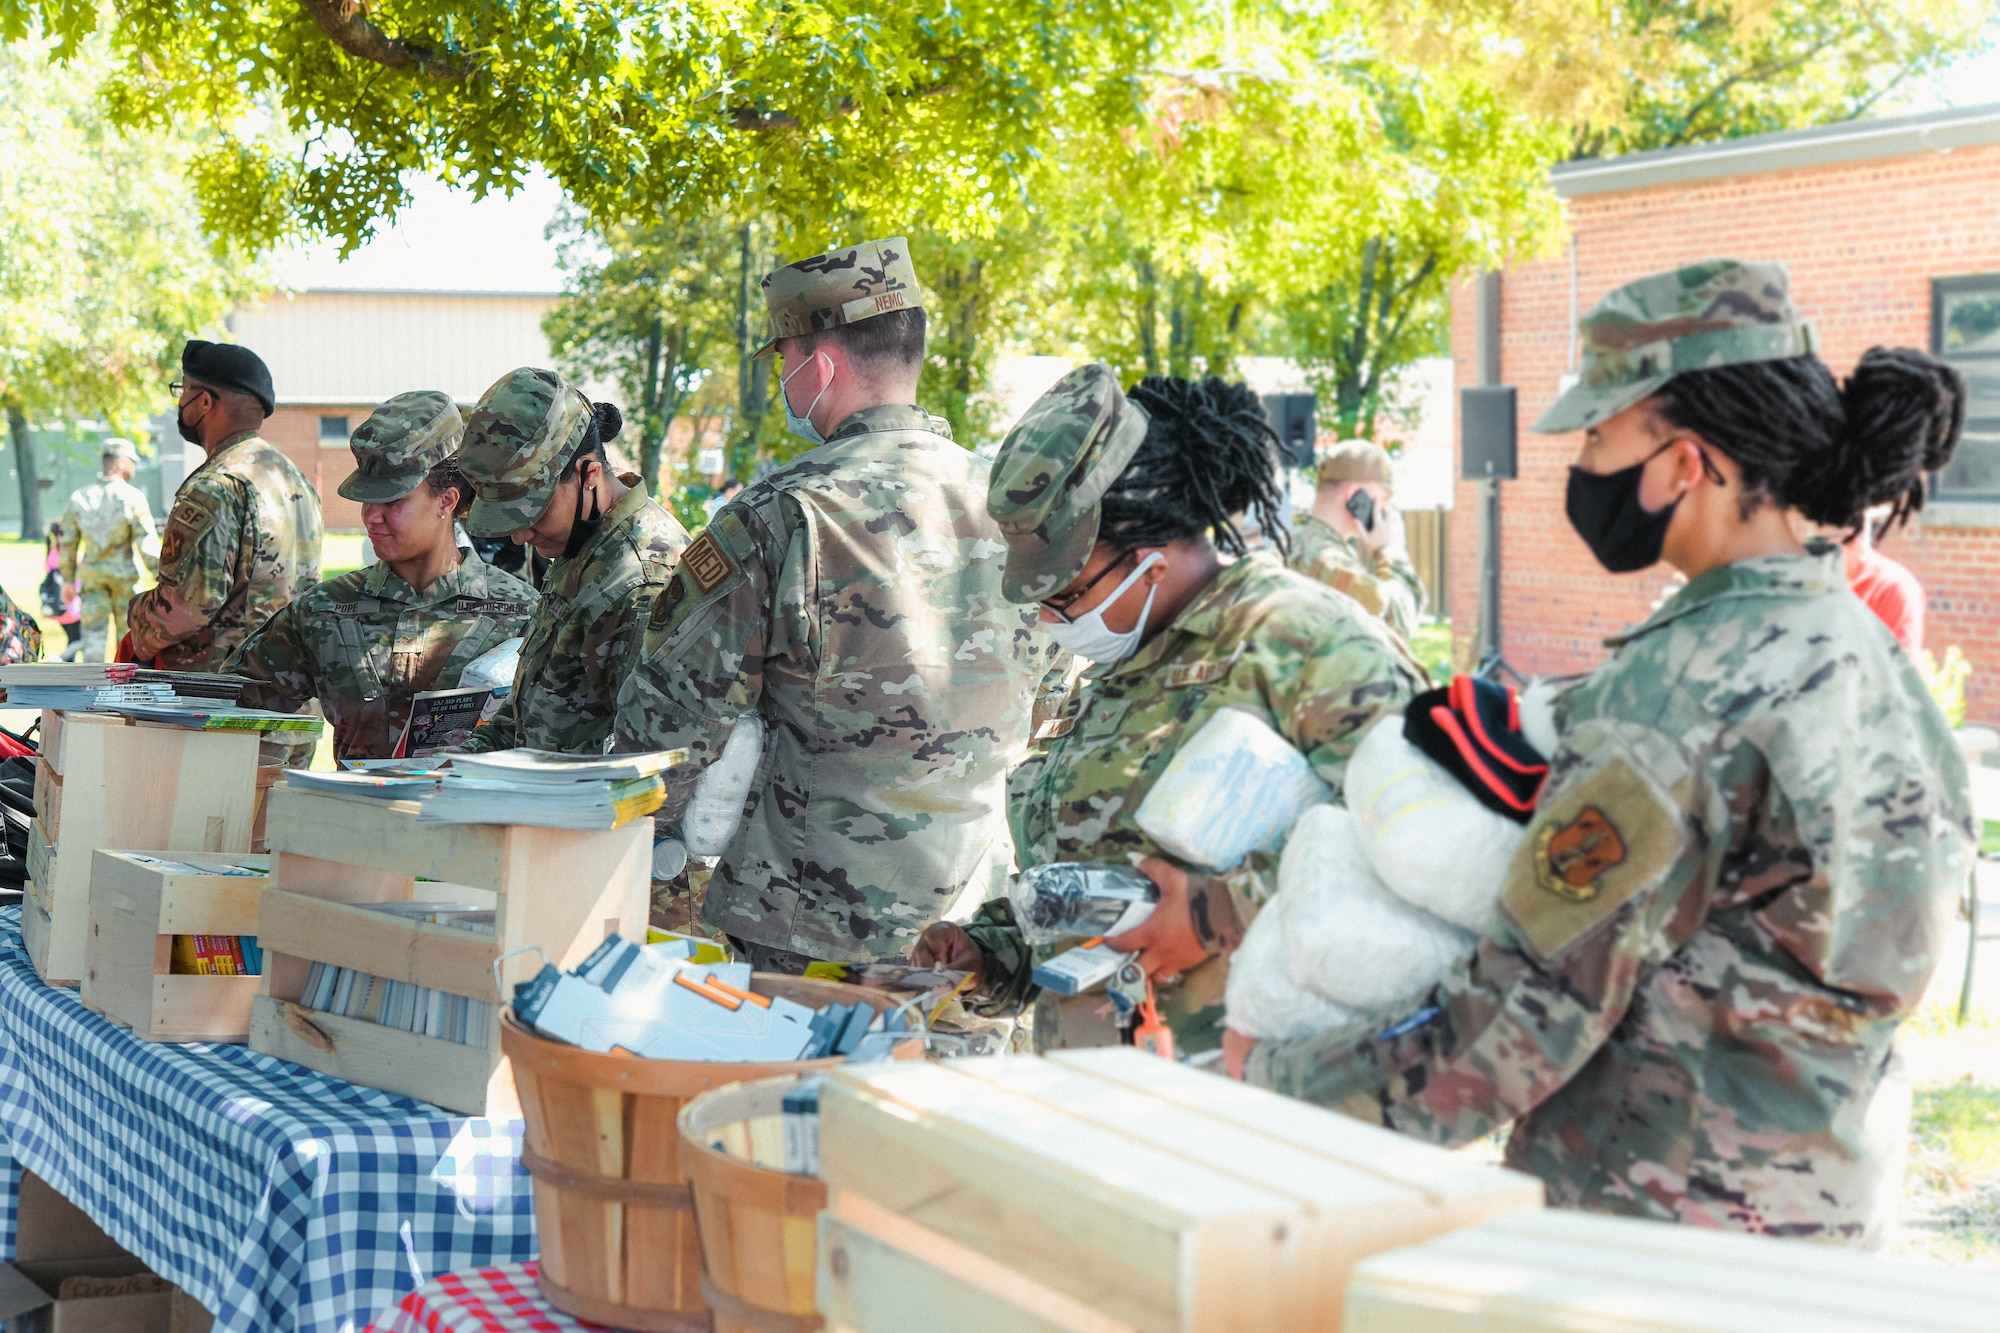 Airmen collect diaper kits, school supplies, and hygiene items at the Community Commons on Joint Base Andrews, Md., Aug. 11, 2021.